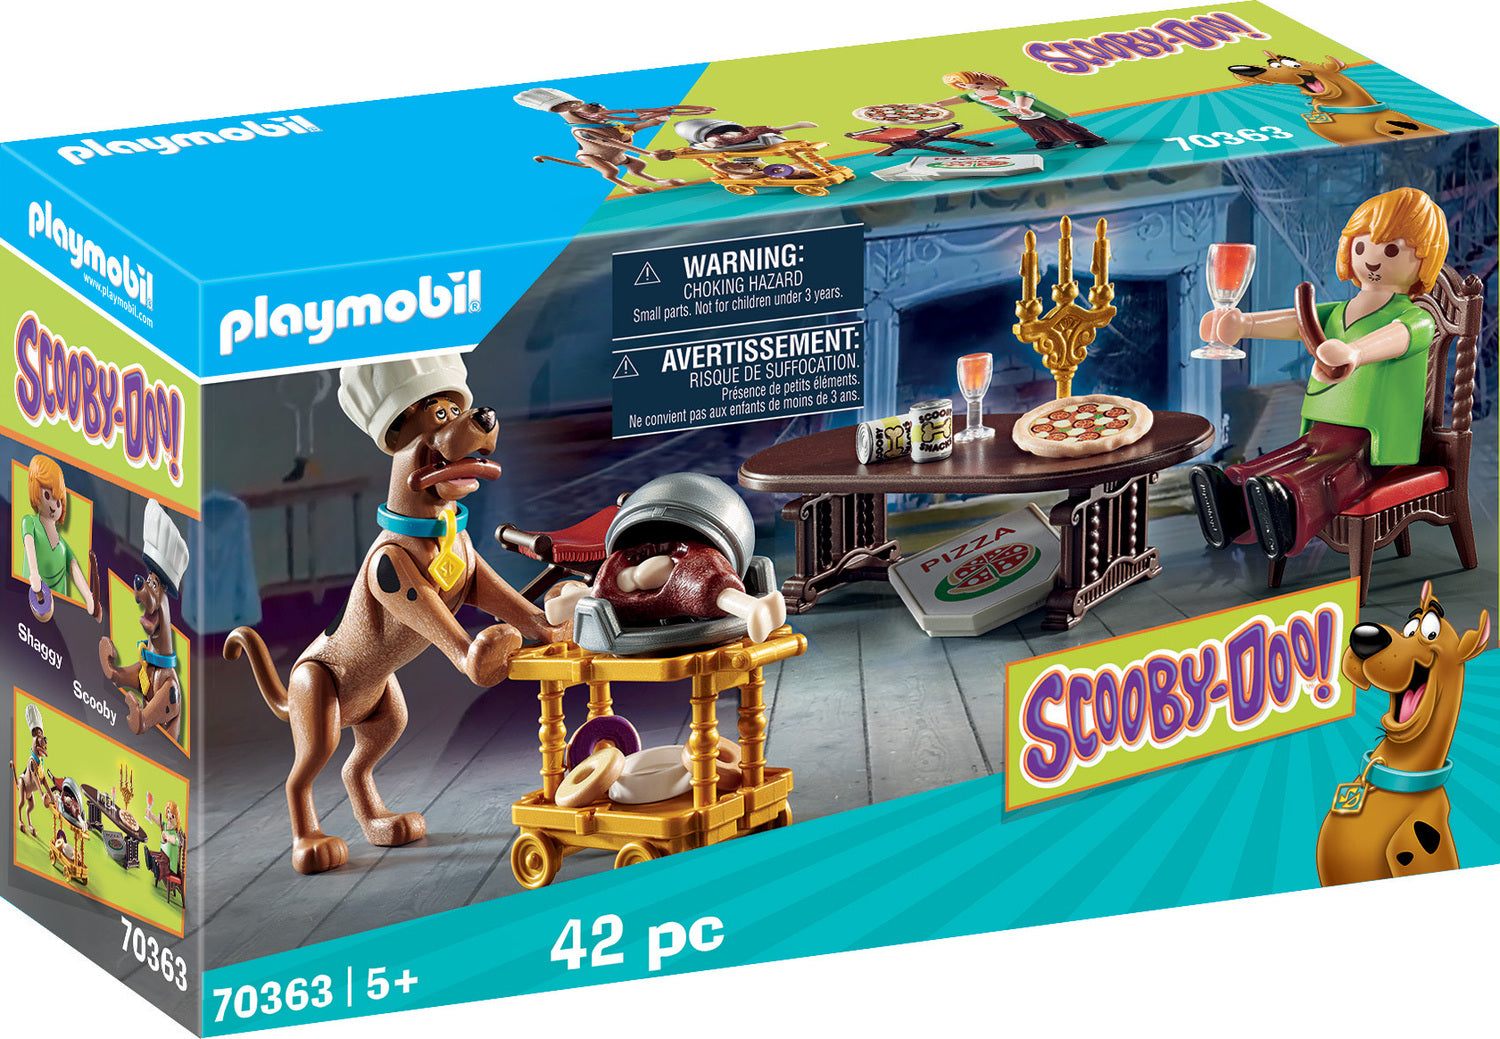 Playmobil 70363 Scooby Doo Dinner with Shaggy Turner Toys